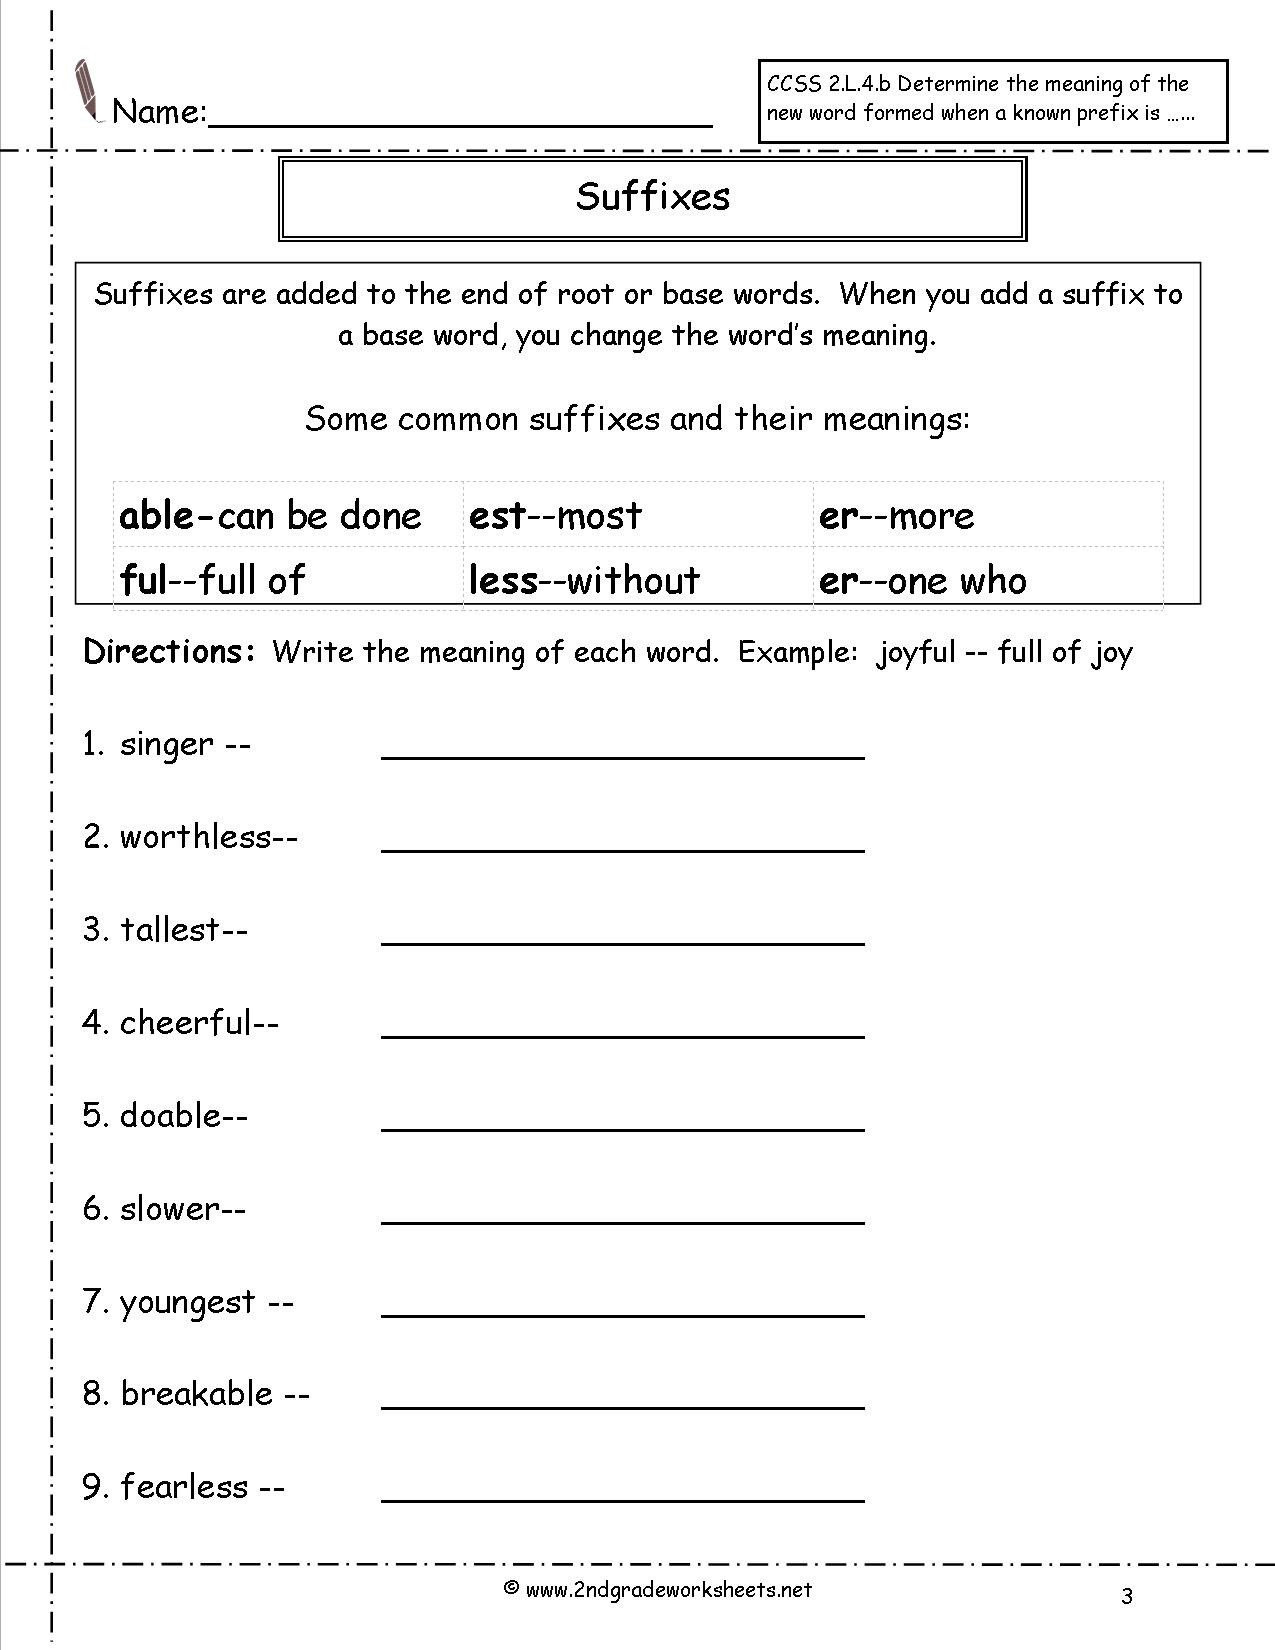 prefixes-and-suffixes-worksheet